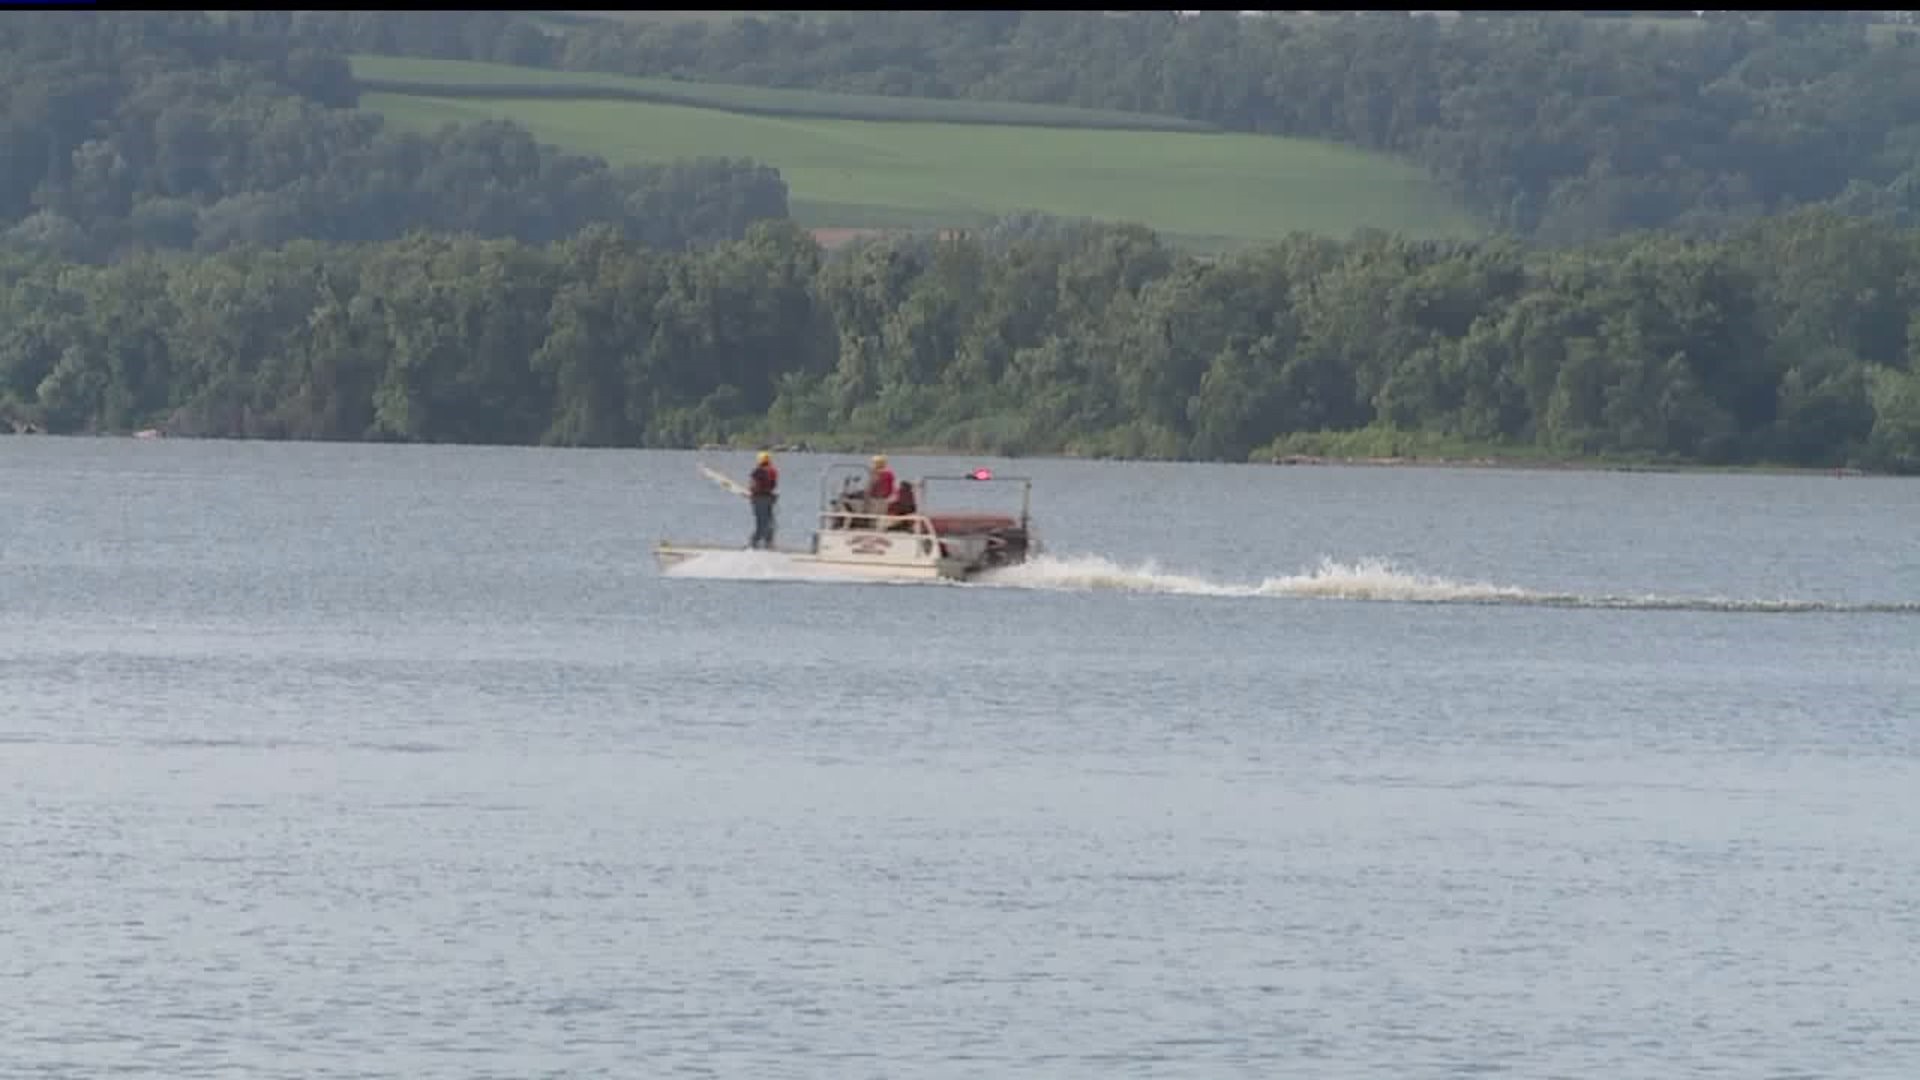 Crews search Susquehanna River after jet skier reports seeing body in water